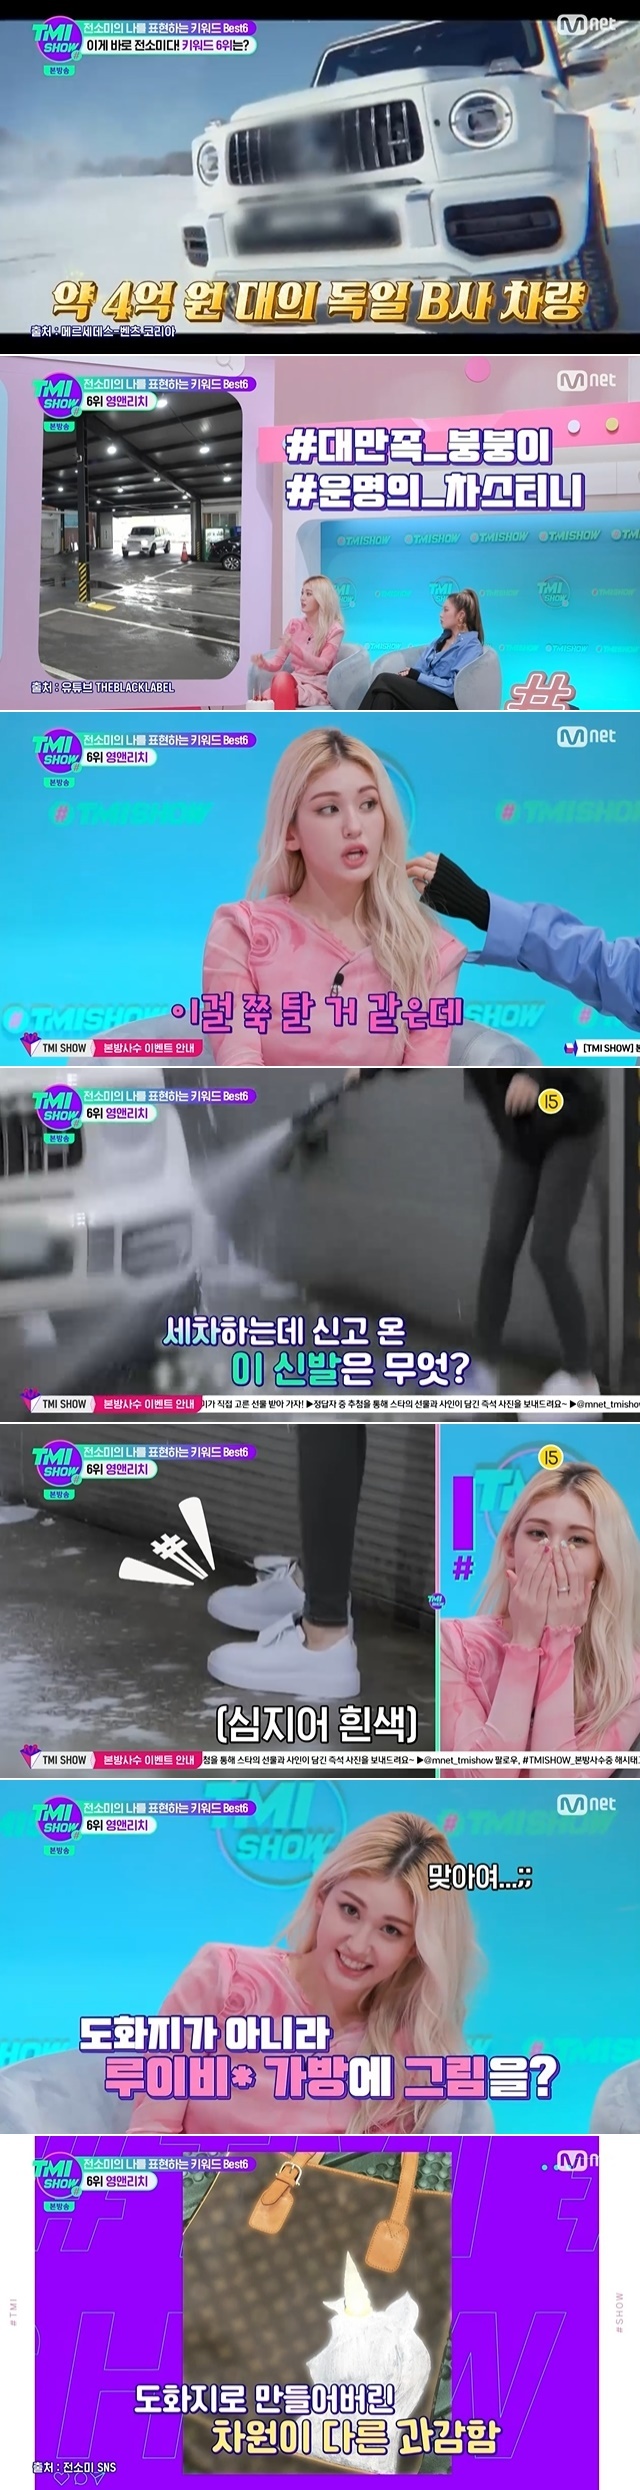 Jeon So-mi cited Young & Rich as a keyword to express himself.In Mnet TMI SHOW broadcast on March 16, Keyword BEST 6, which is directly cited by Jeon So-mi, was released.On the same day, former Somi named Young & Rich as BEST 6, and the 22-year-old former Somi bought a The Red Car worth 400 million won for the first time at 21 years old.It was my dream car, and my mother is also used to seeing me from above because she is in a high car, said Jeon So-mi. It seems to fit me well.Asked if there is a higher level of dream car, he said, I will continue to ride this, he said. I want to buy my parents car.